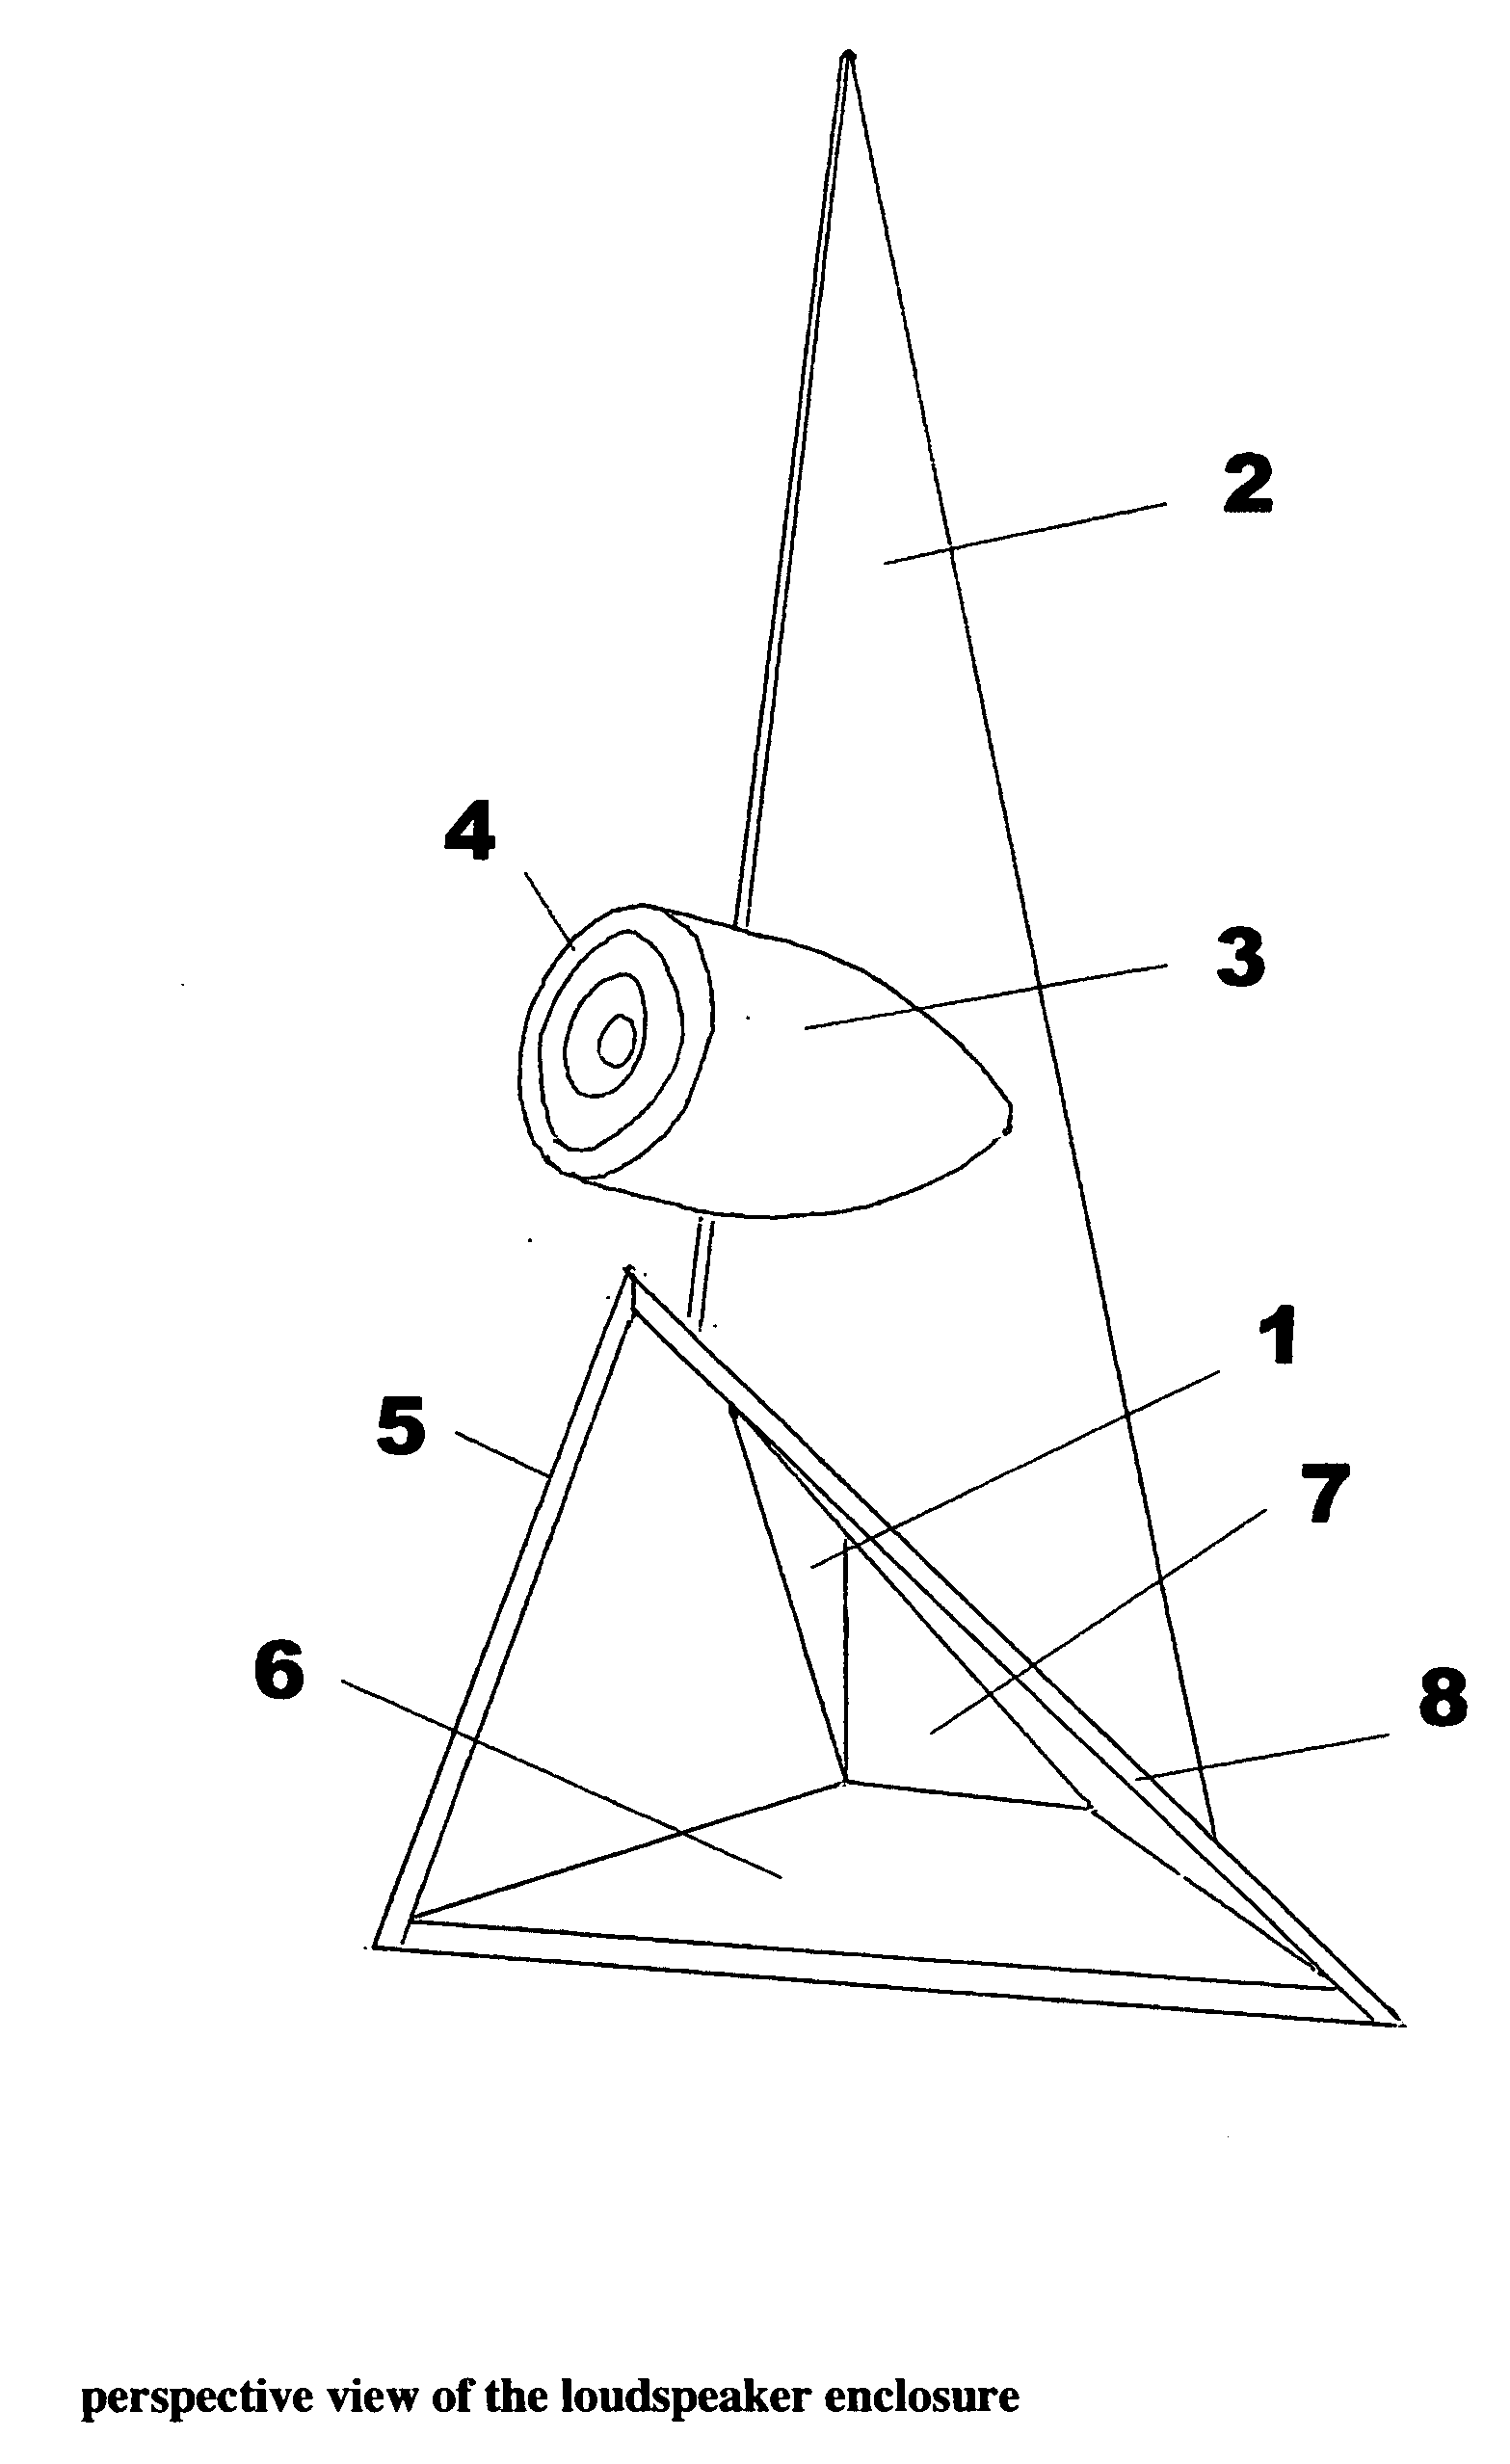 Loudspeaker enclosure with cylindrical compression chamber and tapered triangular folded horn terminating in an extended triangular bell.